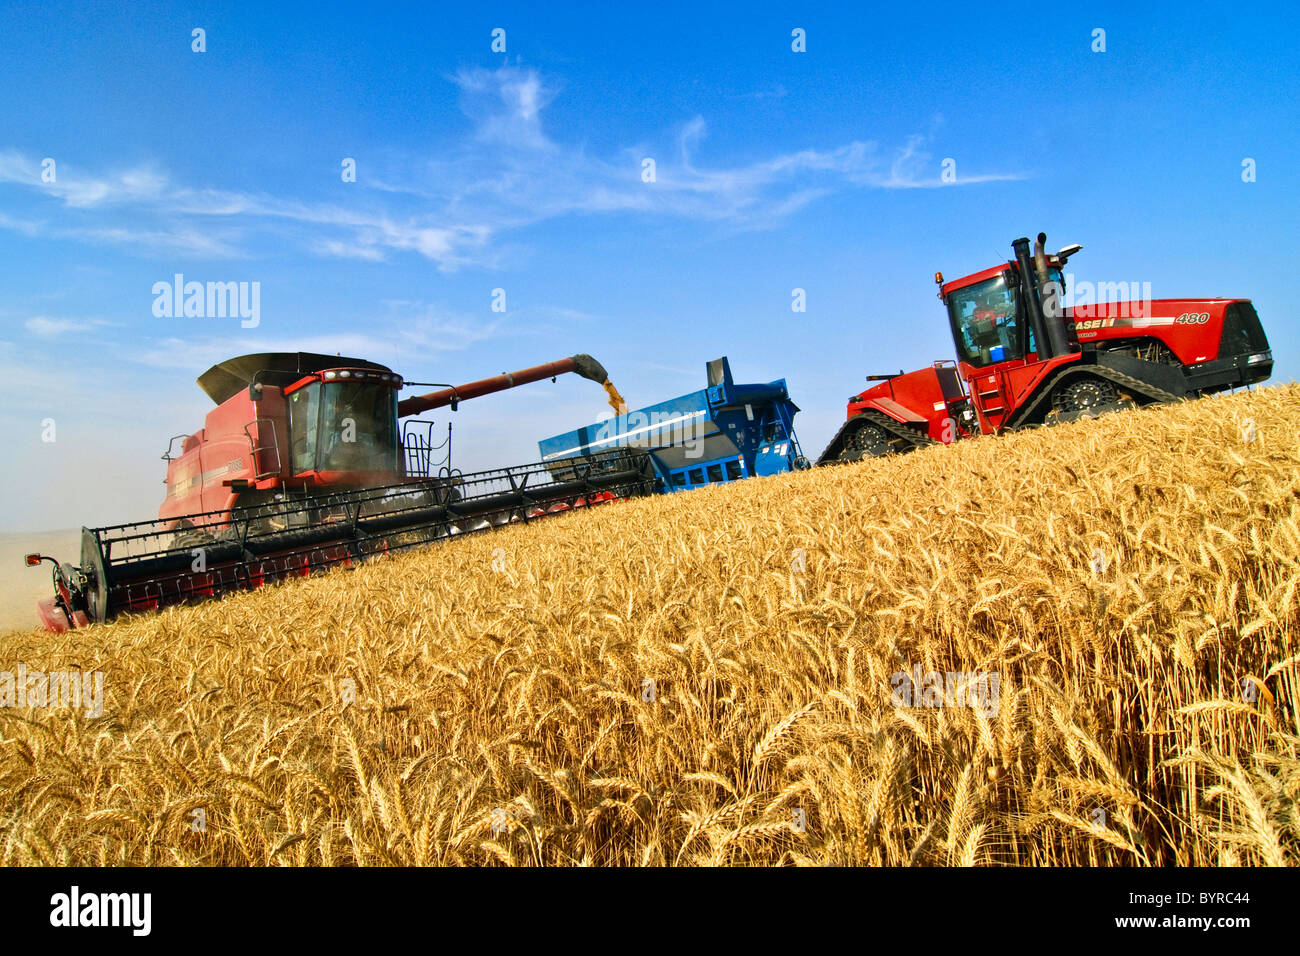 A Case IH combine harvests wheat on a steep hillside while unloading “on-the-go” into a grain cart pulled by a tracked tractor. Stock Photo